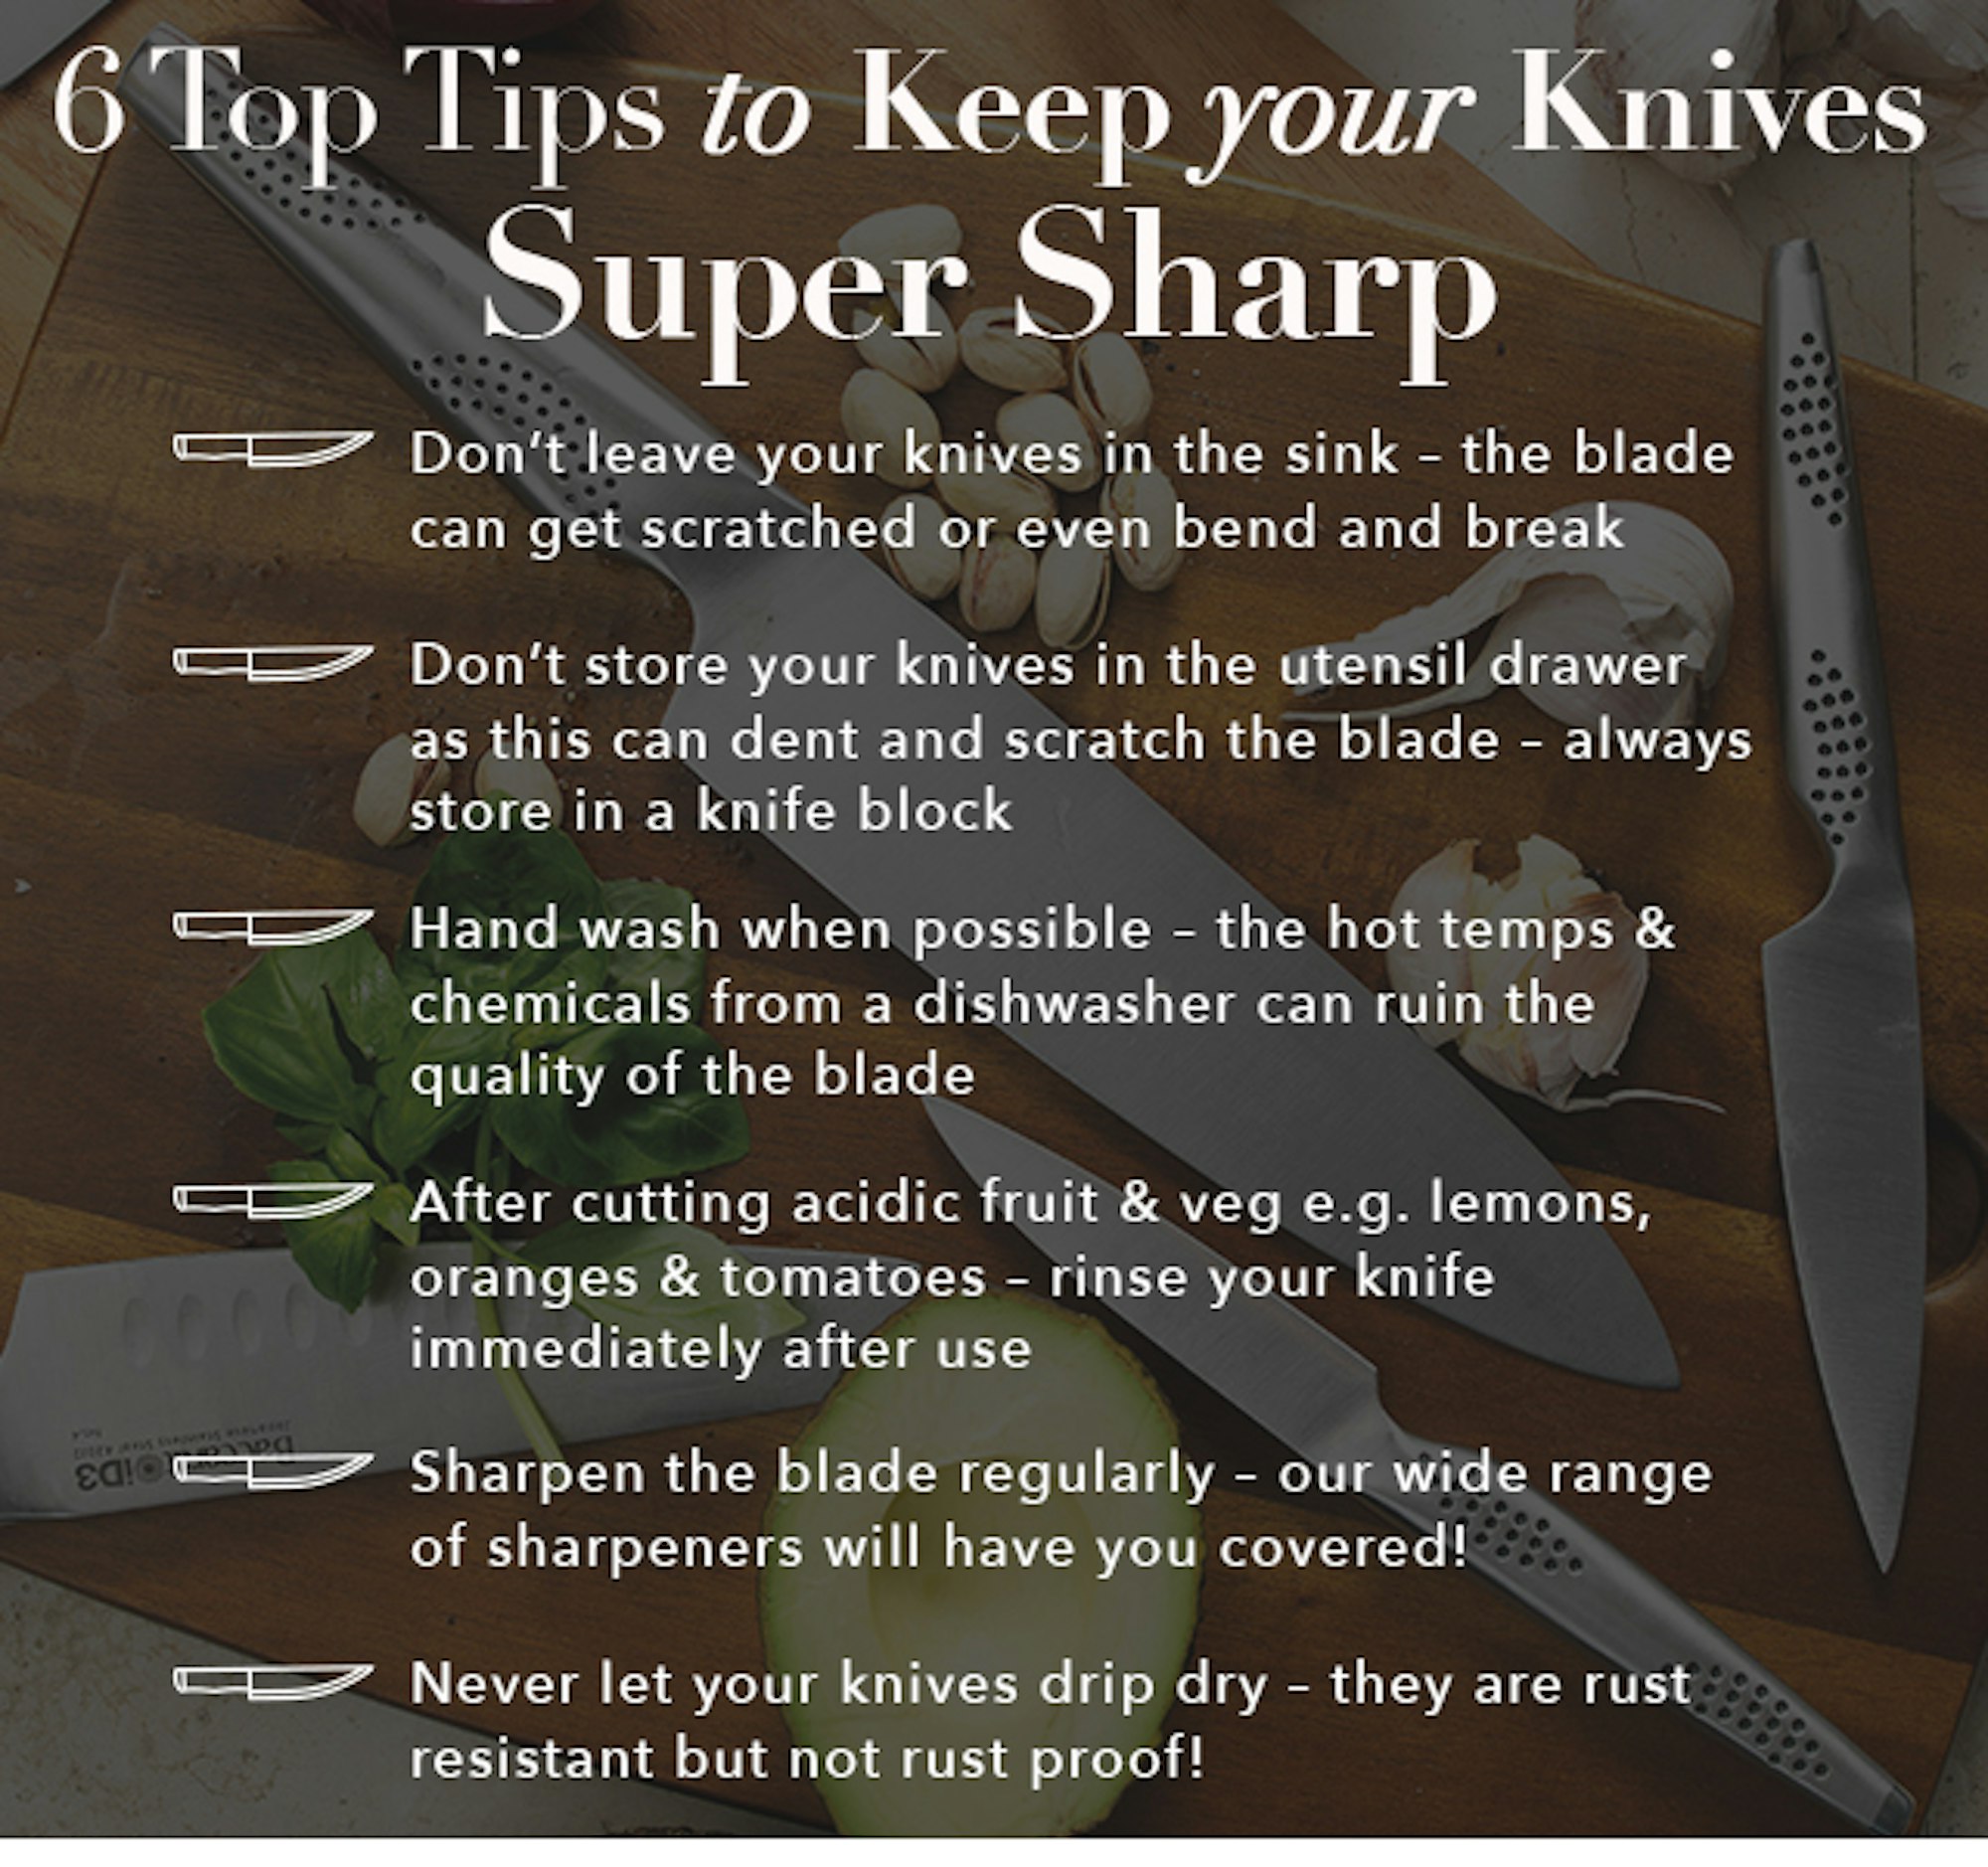 Keep your knives sharp infographic